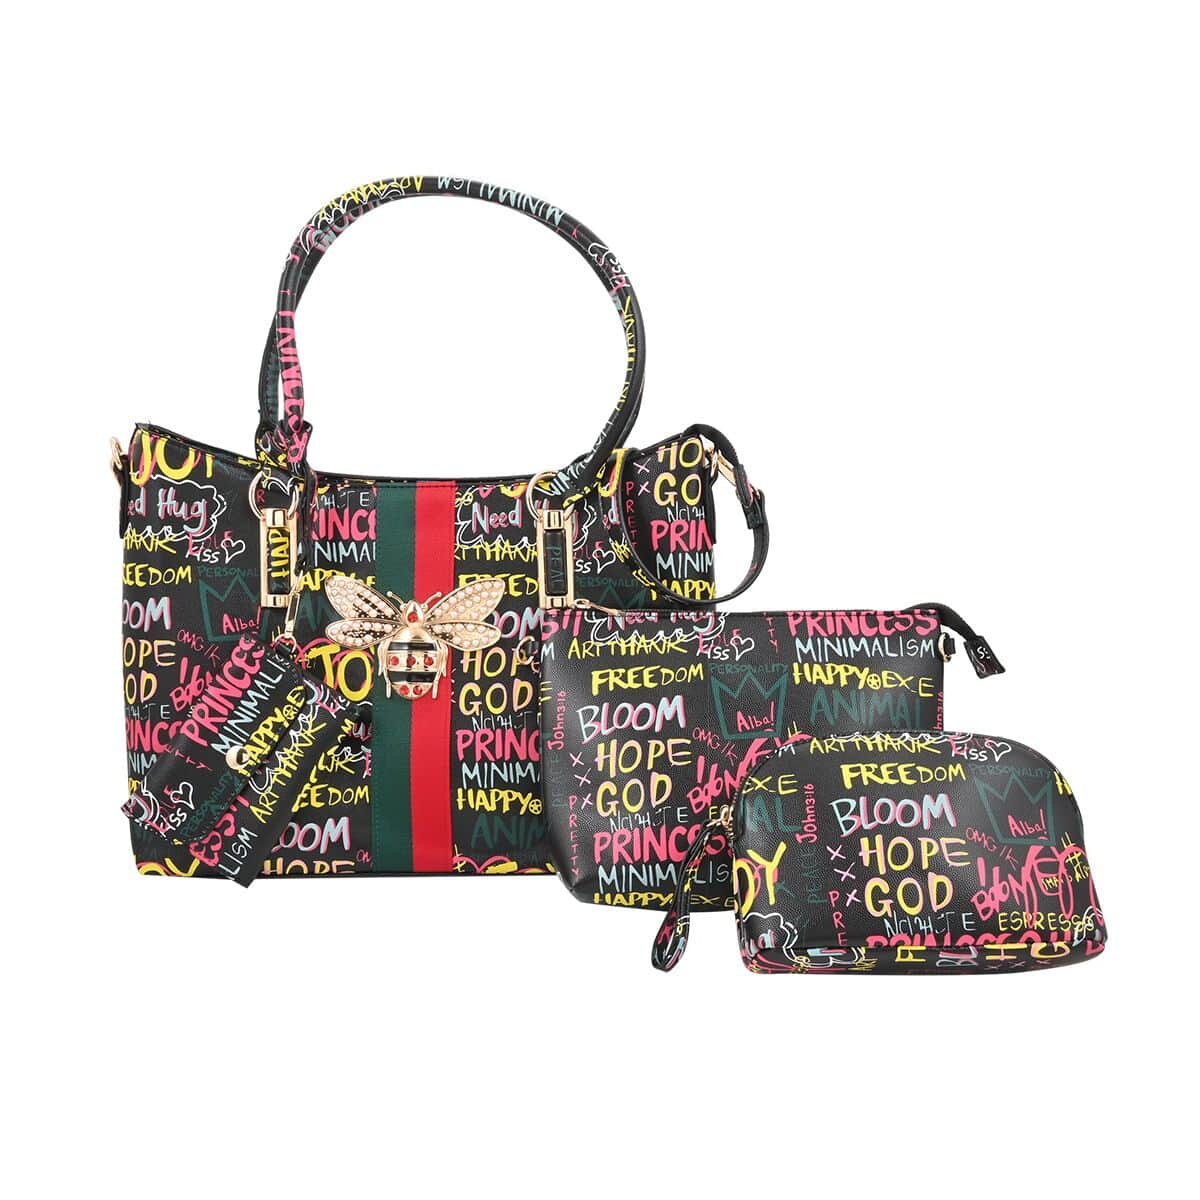 TLV 4pc Black & Multi Color Vegan Leather Tote Bag, Clutch, Cosmetic Bag and Coin Purse (14.5"x10"x5") image number 0